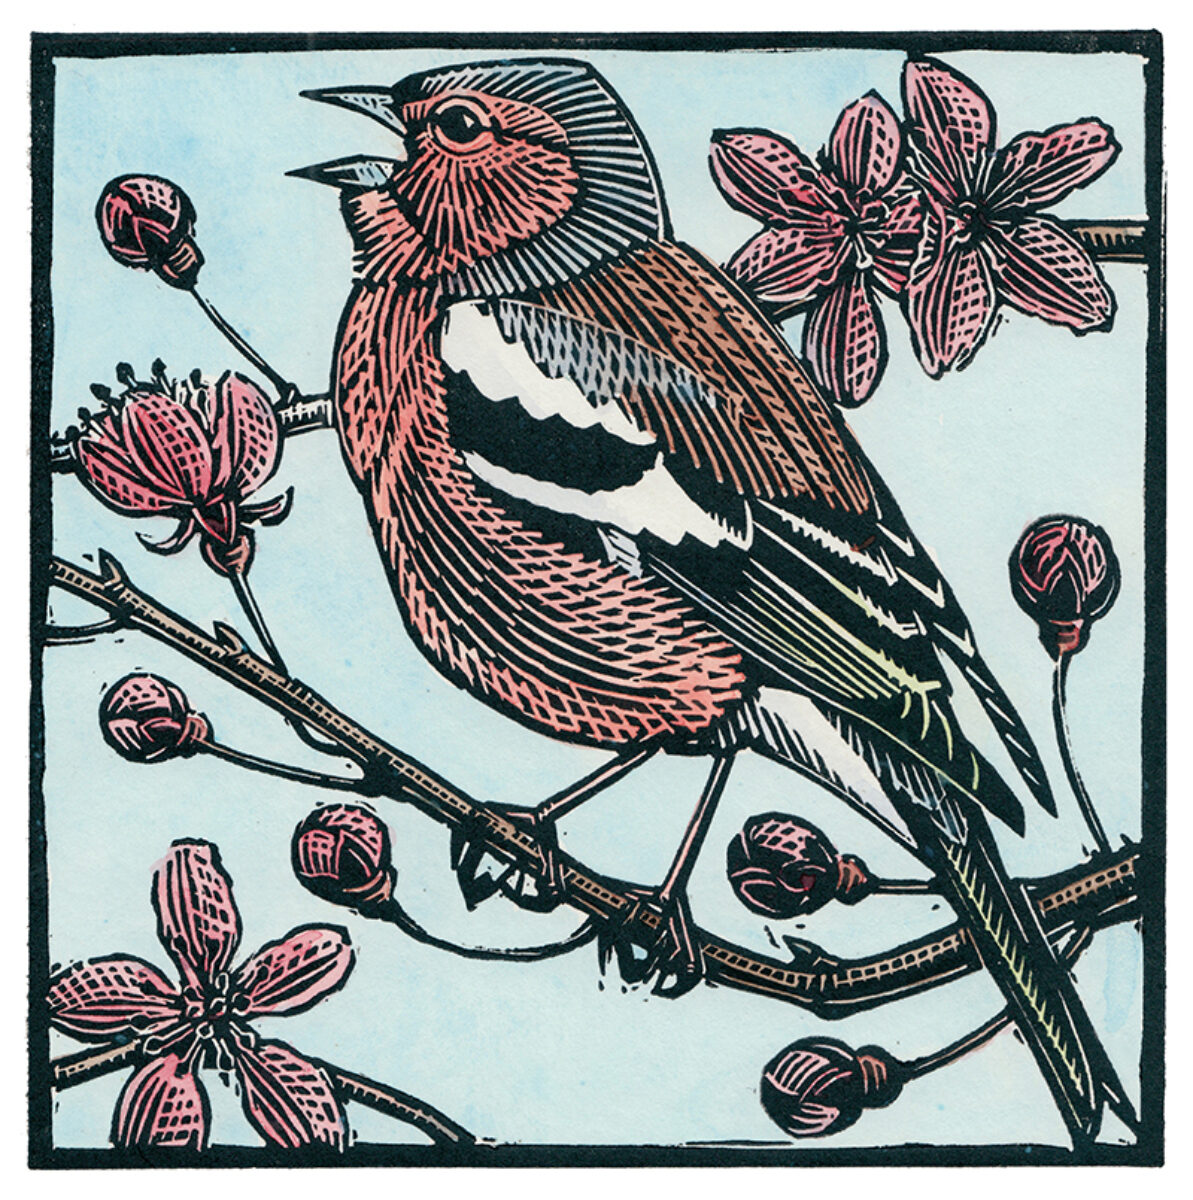 Artwork image titled: Chaffinch in song